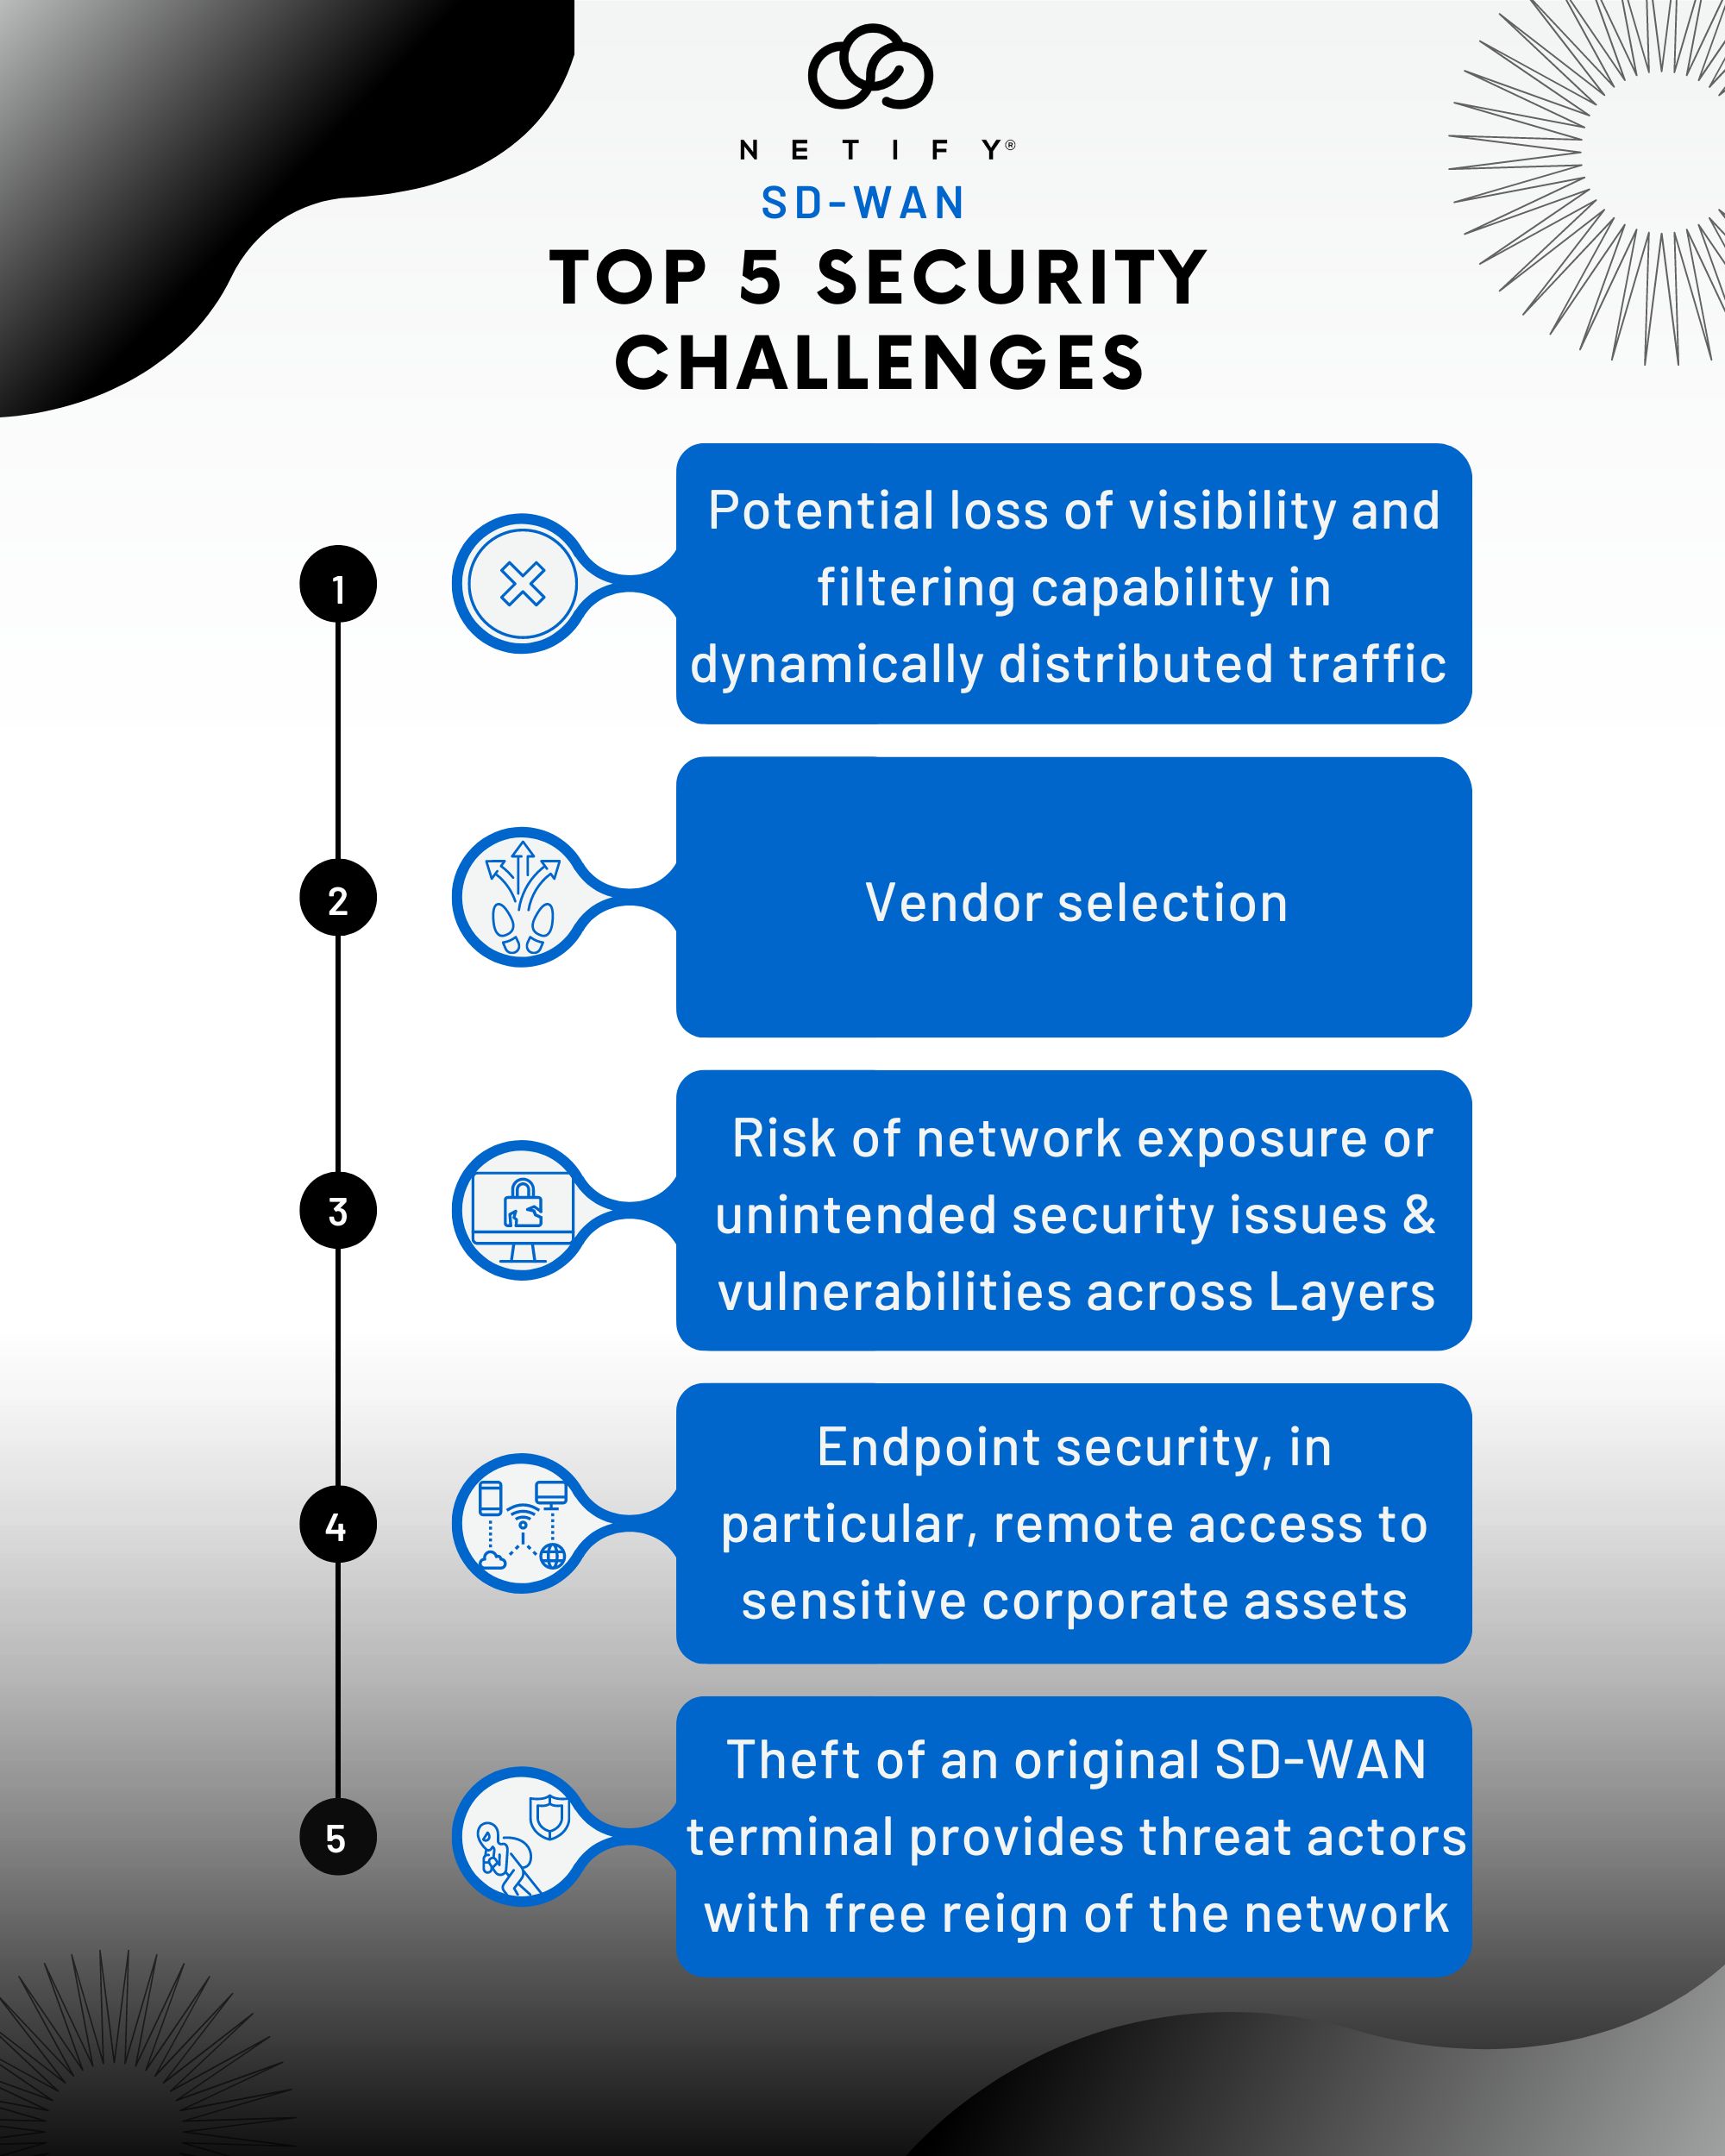 What is the biggest security risk with SD-WAN?